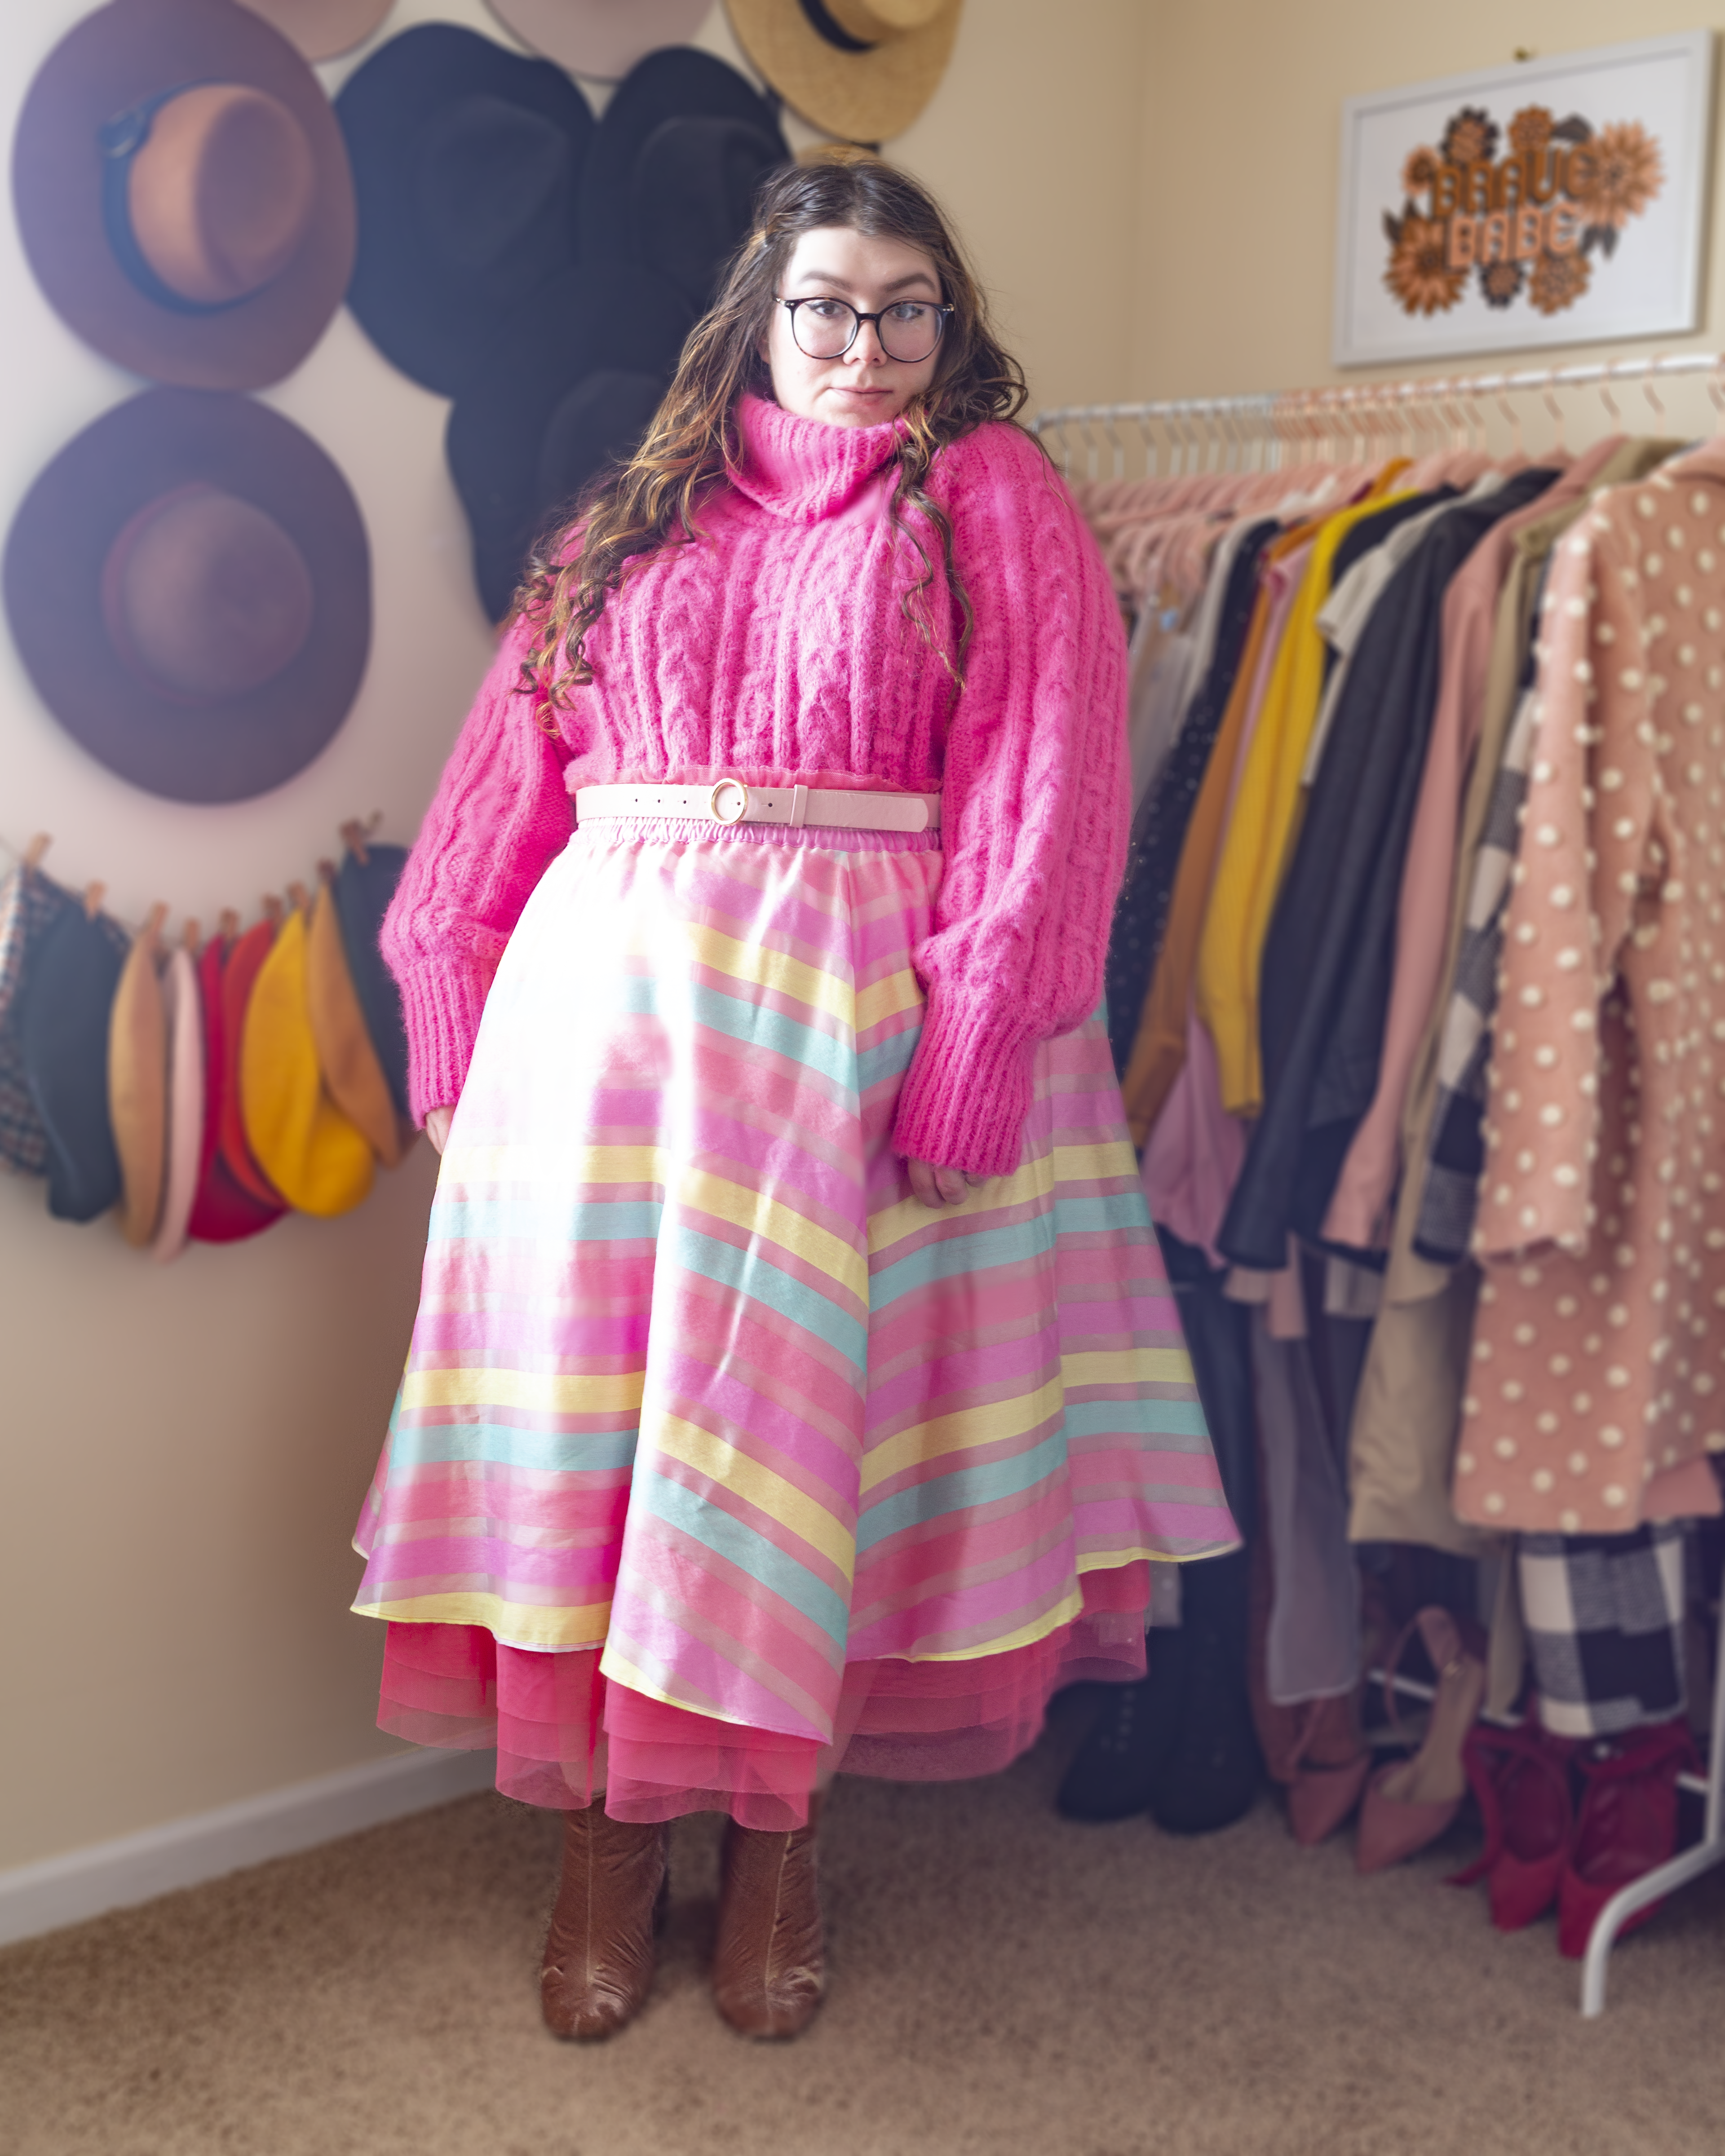 An outfit consisting of a bright pink turtleneck sweater tucked into a pastel pink, light blue and light yellow striped tulle midi skirt and pink heeled clogs.